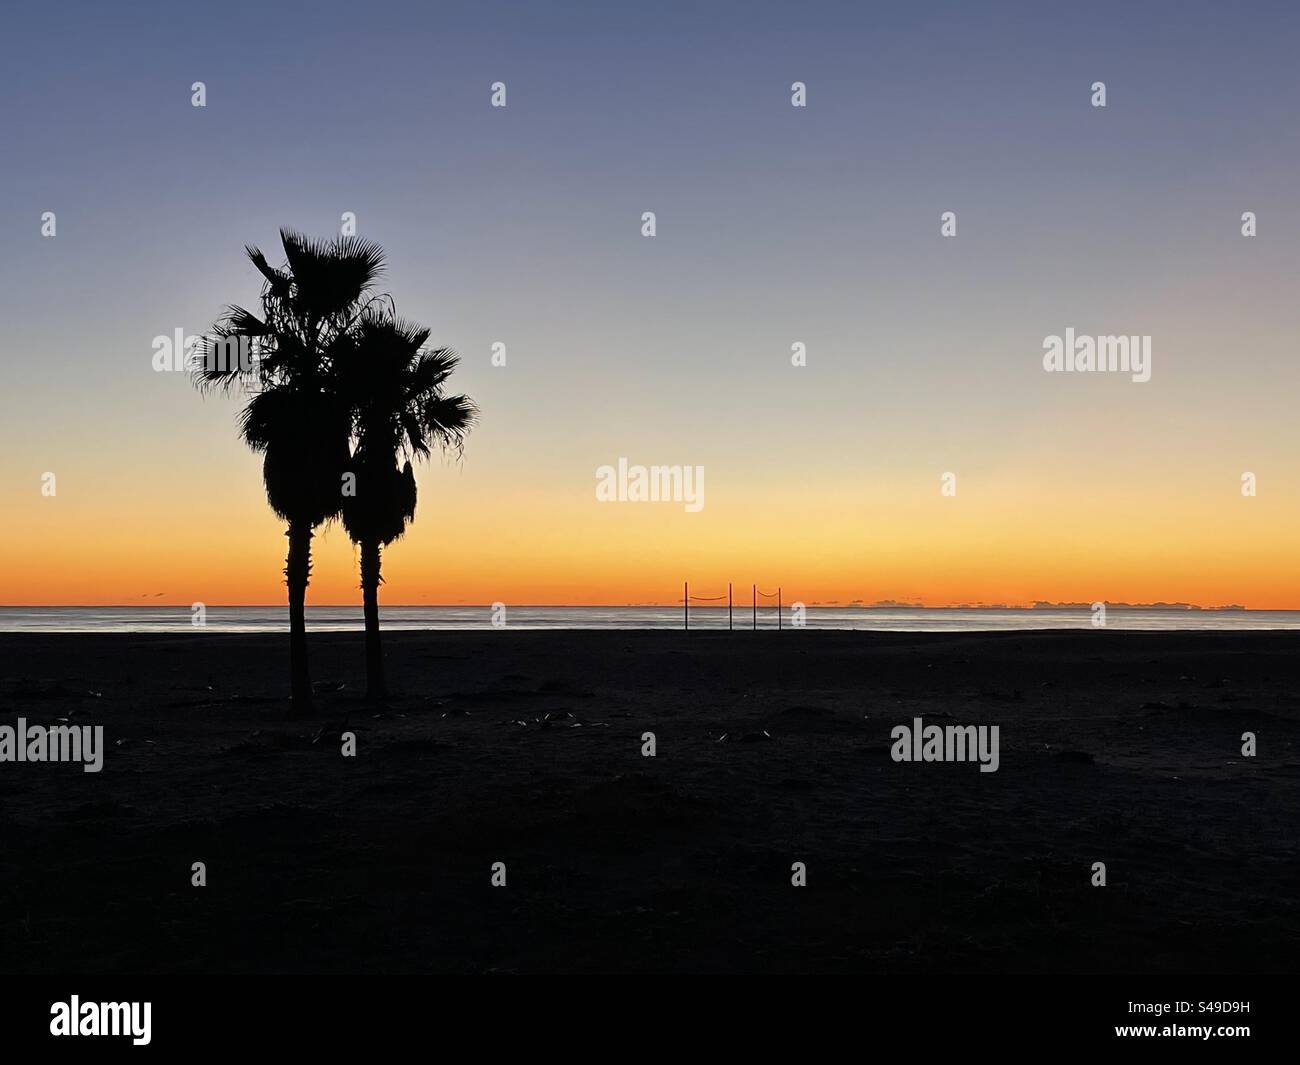 Silhouette of a duo of palm trees on the beach of Burriano, Spain. Set against a colourful sunrise over the Mediterranean. Stock Photo